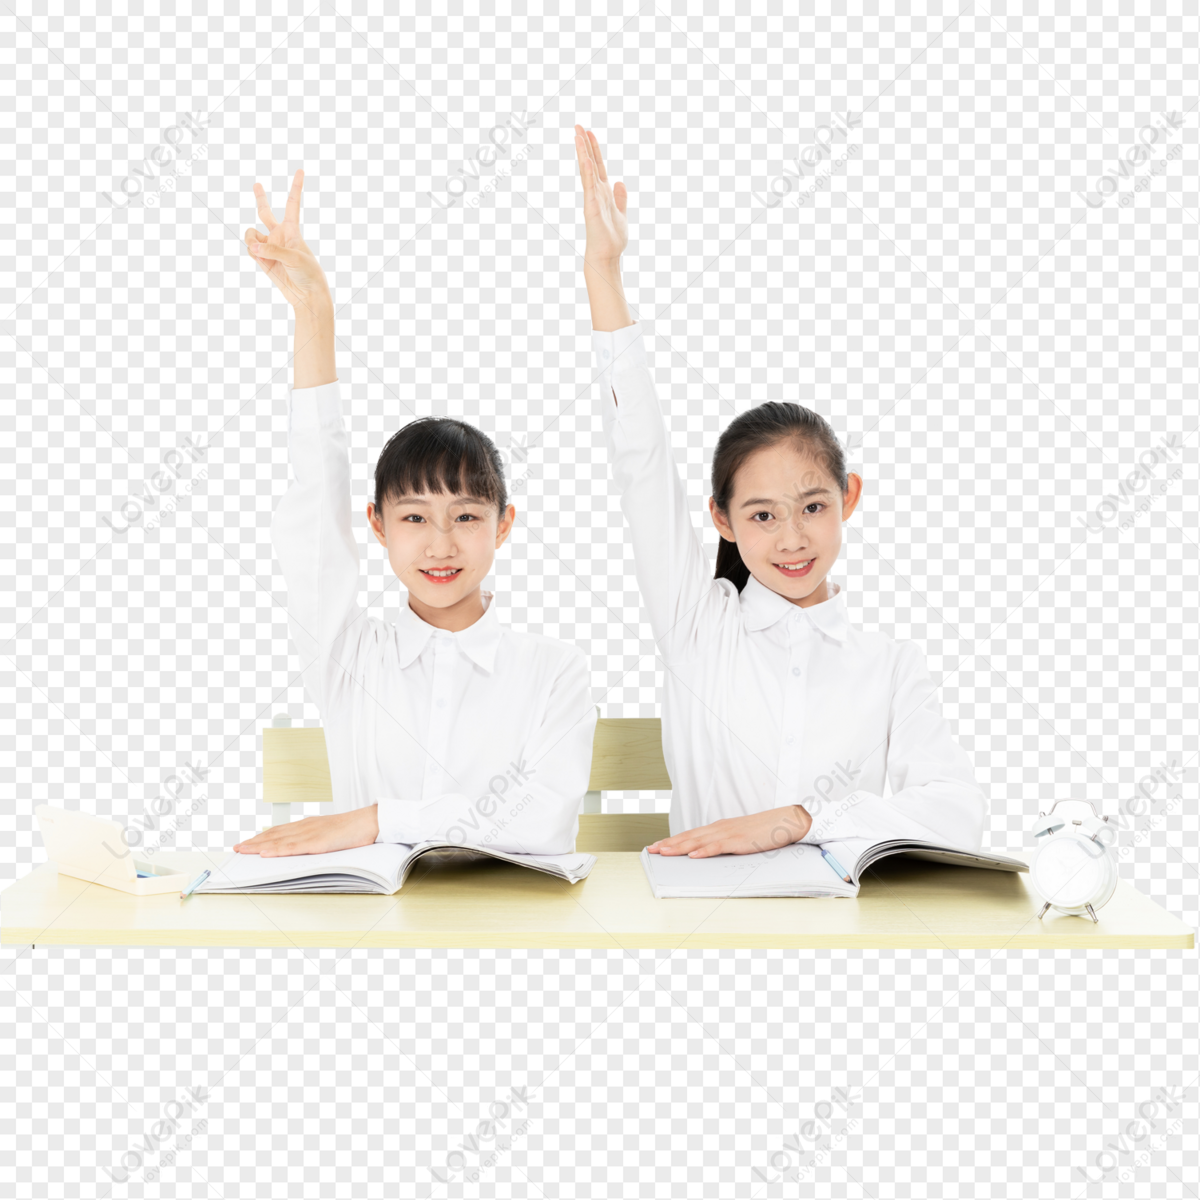 Middle School Students Raising Hands To Speak In Class PNG Transparent  Background And Clipart Image For Free Download - Lovepik | 401717450